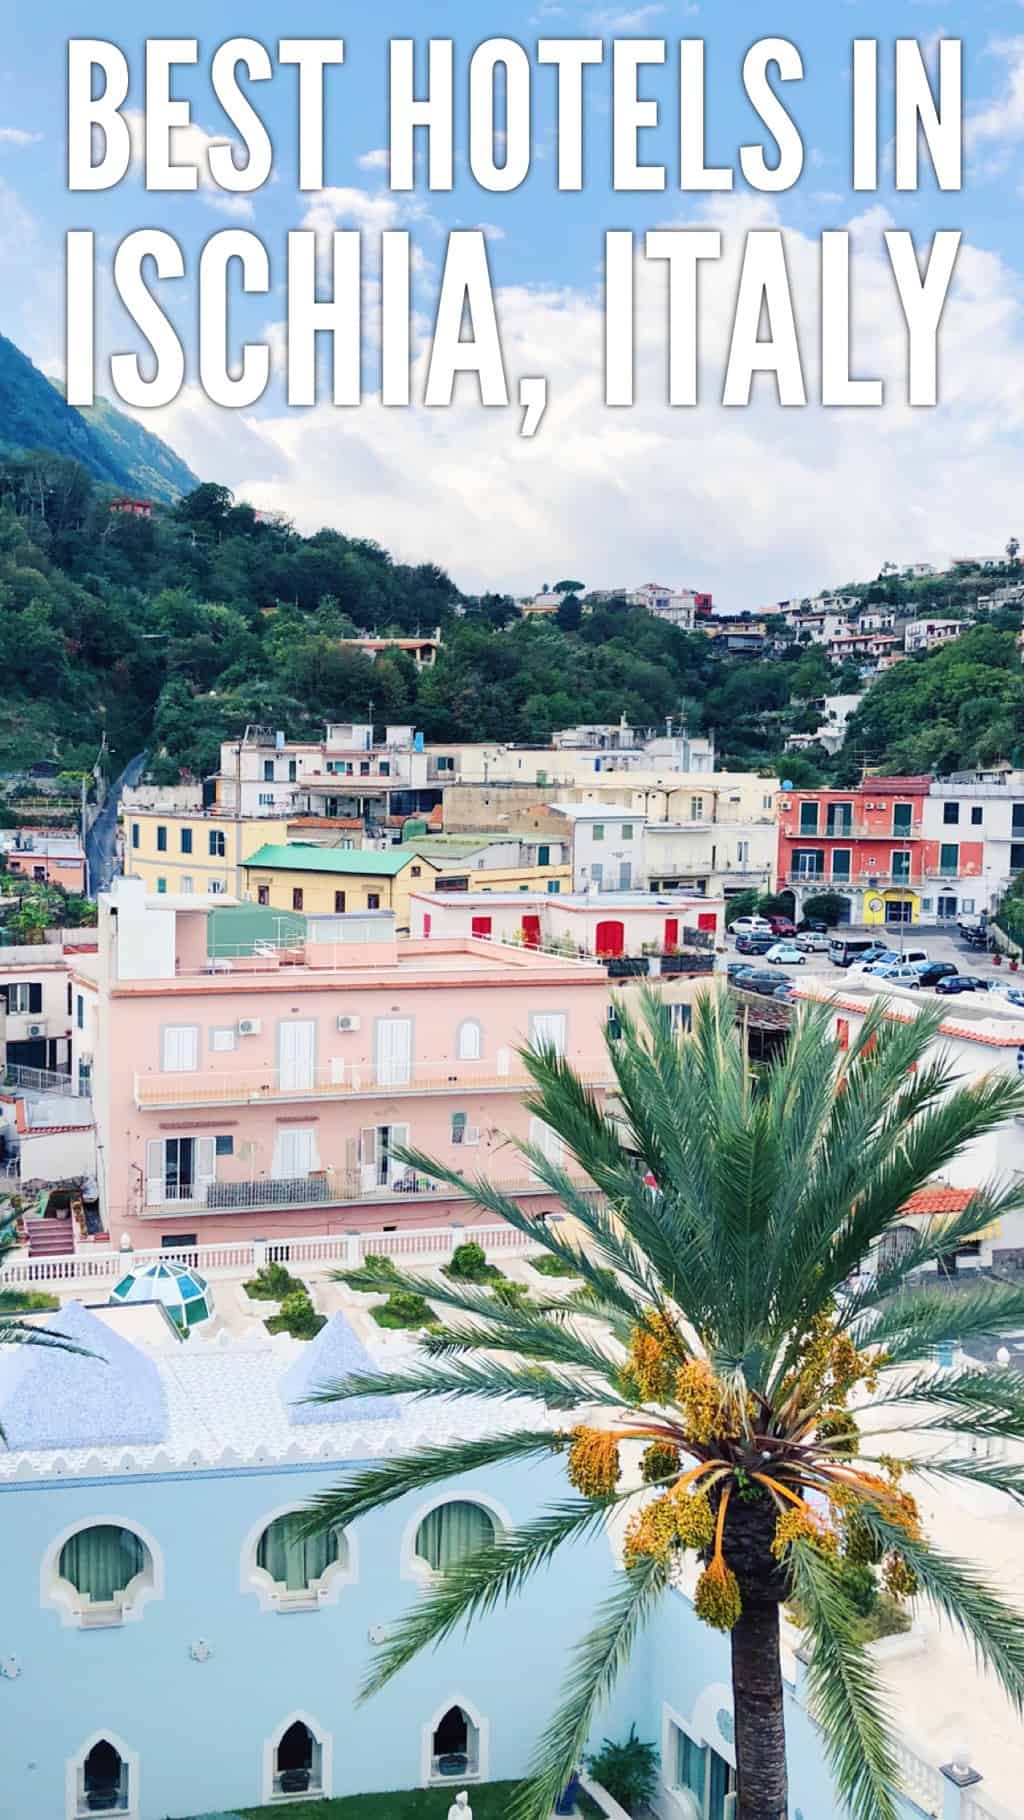 Where to stay in Ischia - best hotels for an unforgettable vacation in Ischia